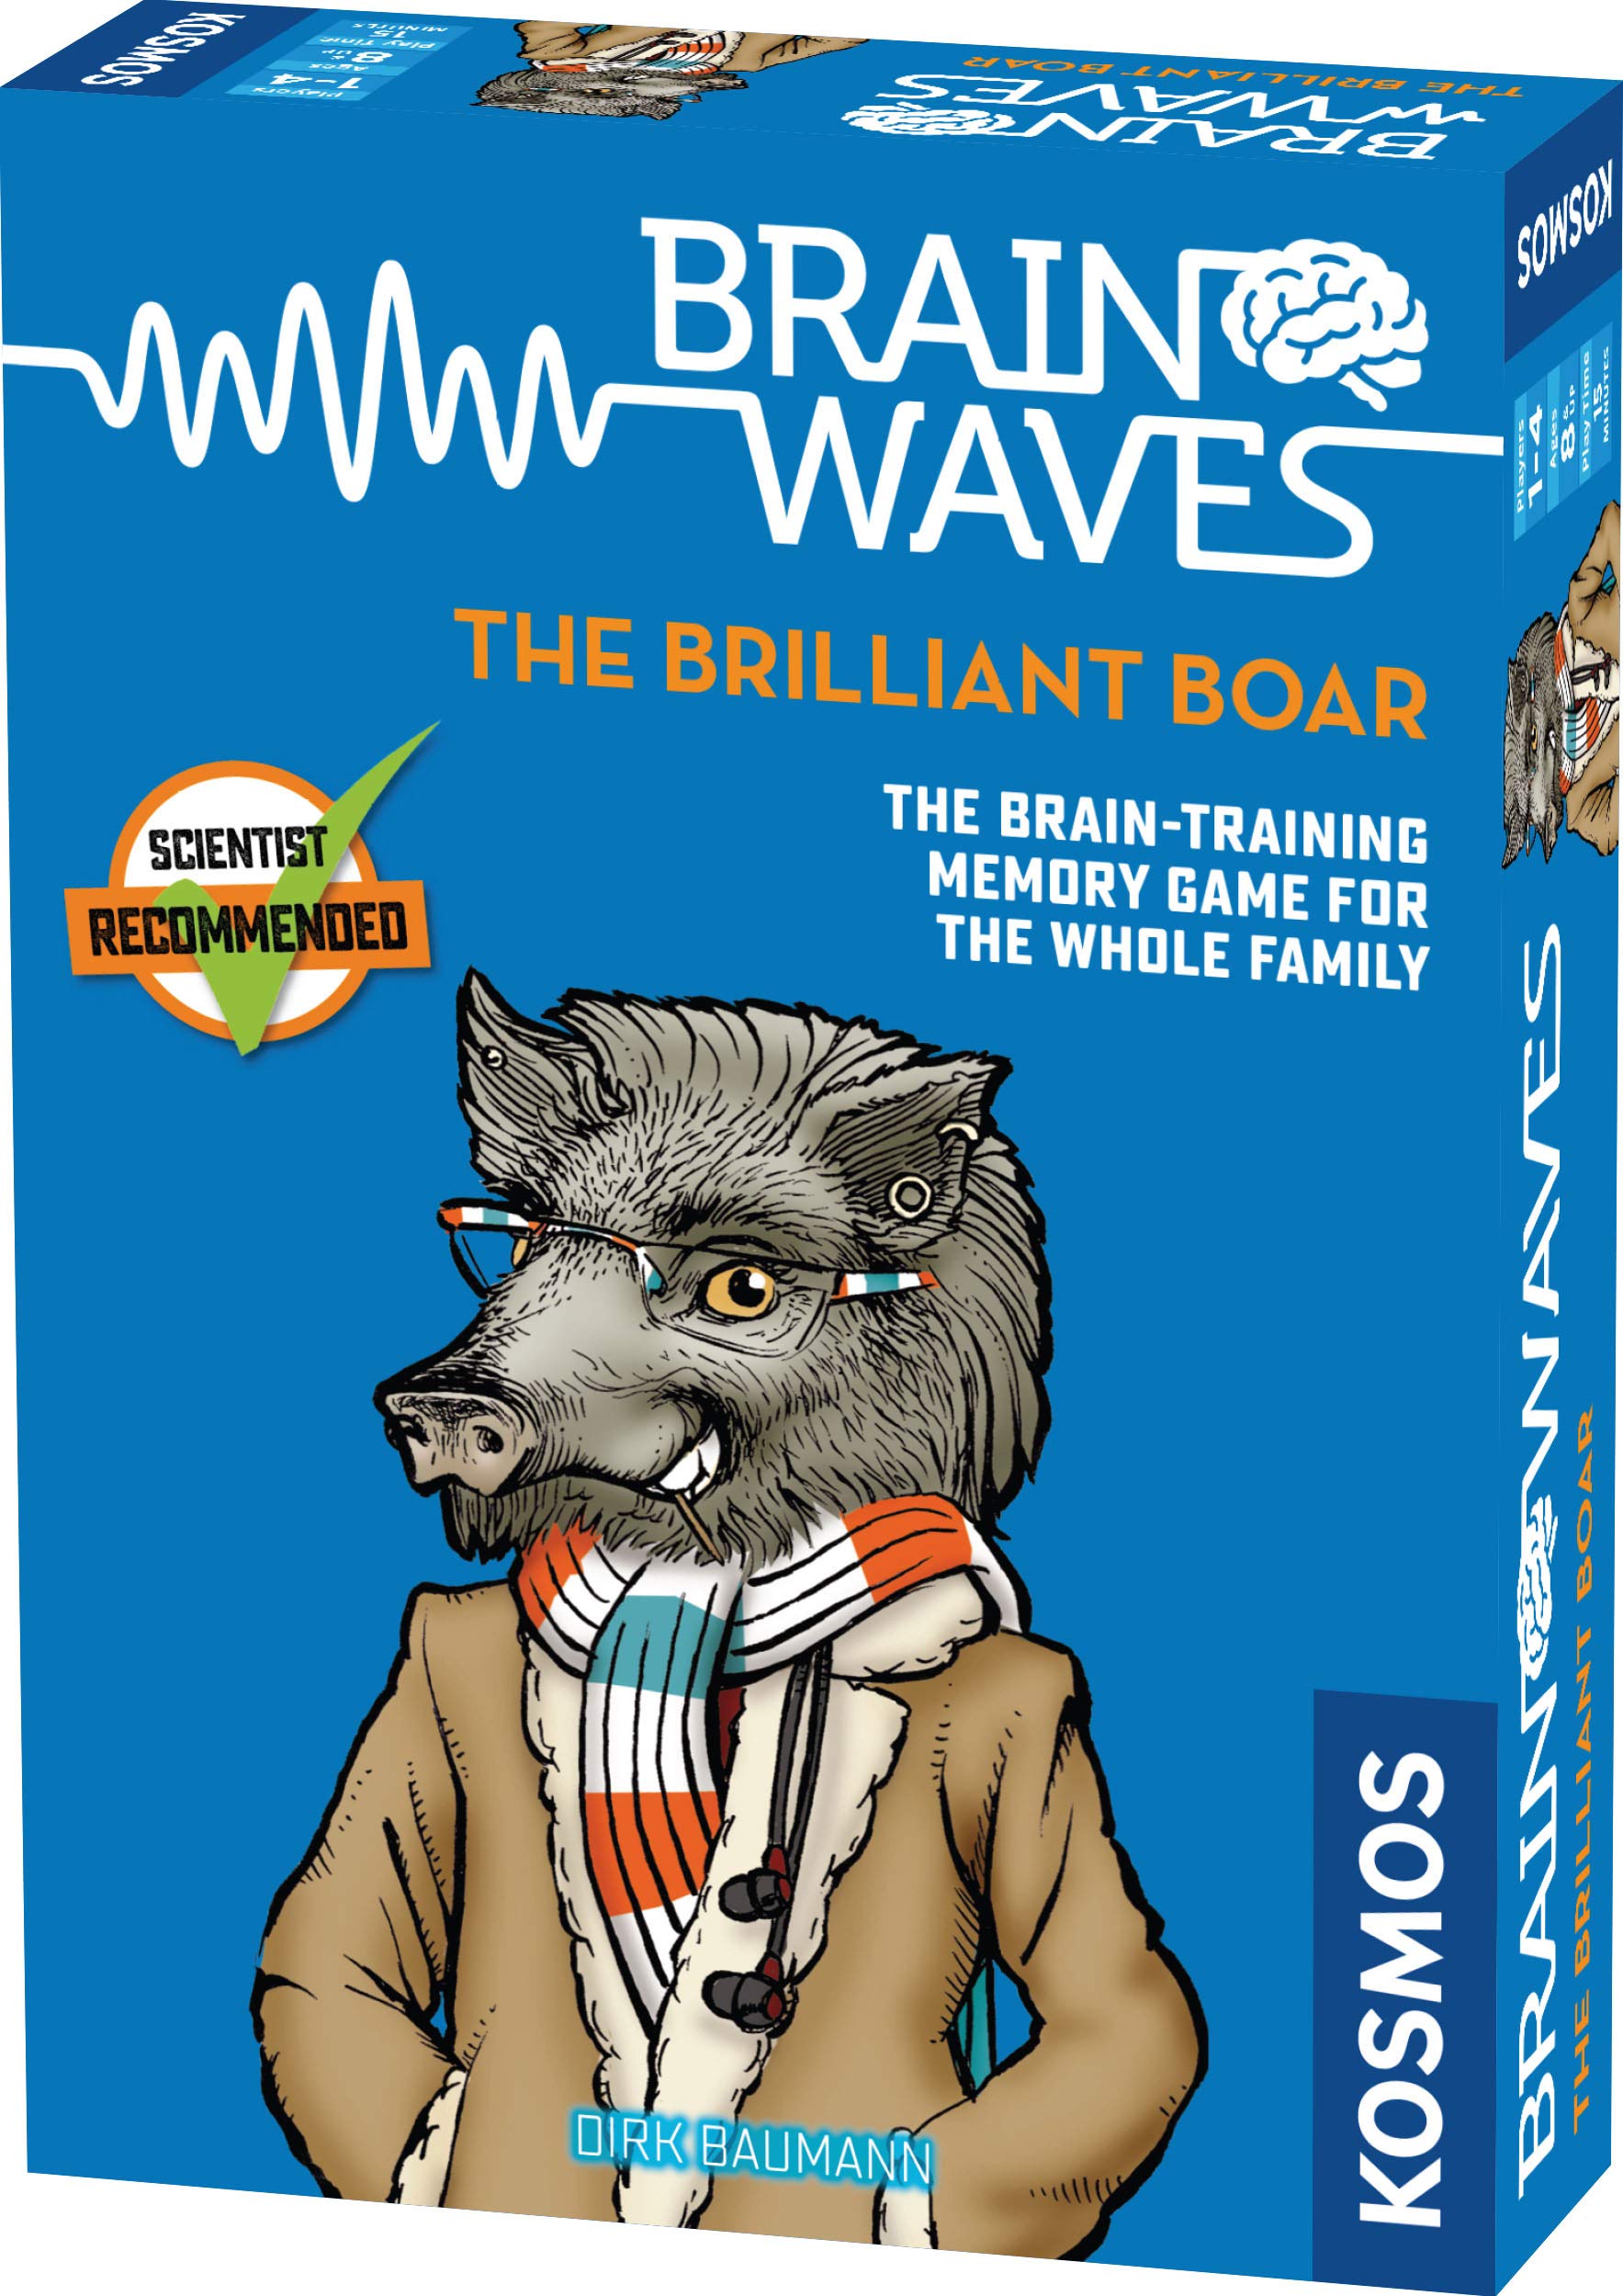 Brainwaves: The Brilliant Boar - A Kosmos Game from Thames & Kosmos | Fun, Scientist Approved, Family-Friendly Games to Sharpen Your Mind & Train Your Brain, for Ages 8+